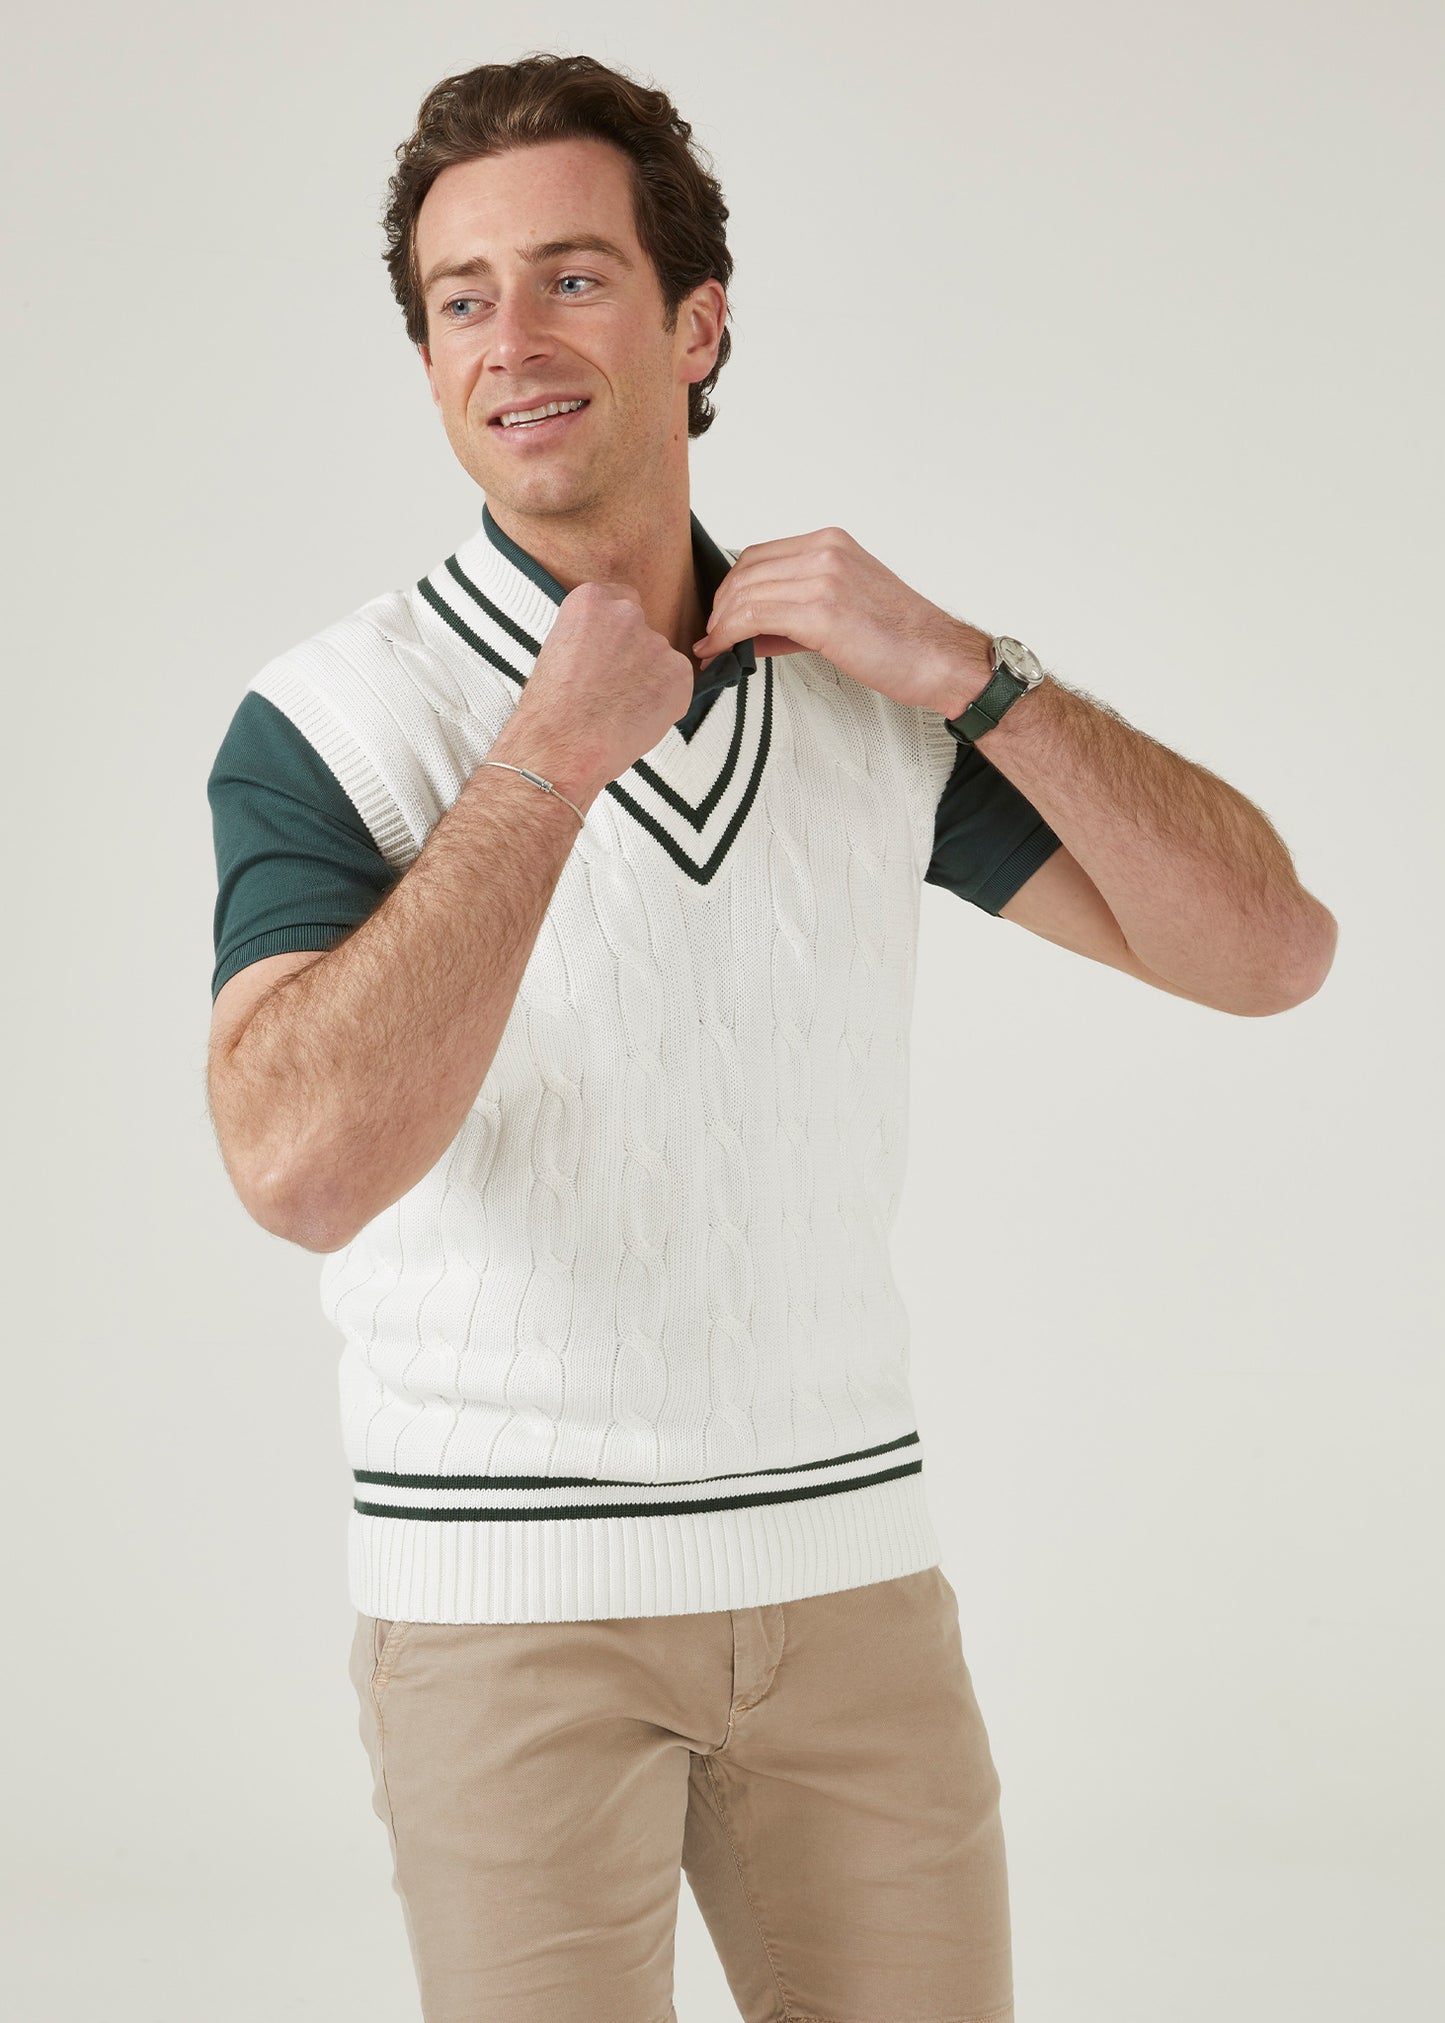 cable knit vee neck slipover in ecru with racing green trim.